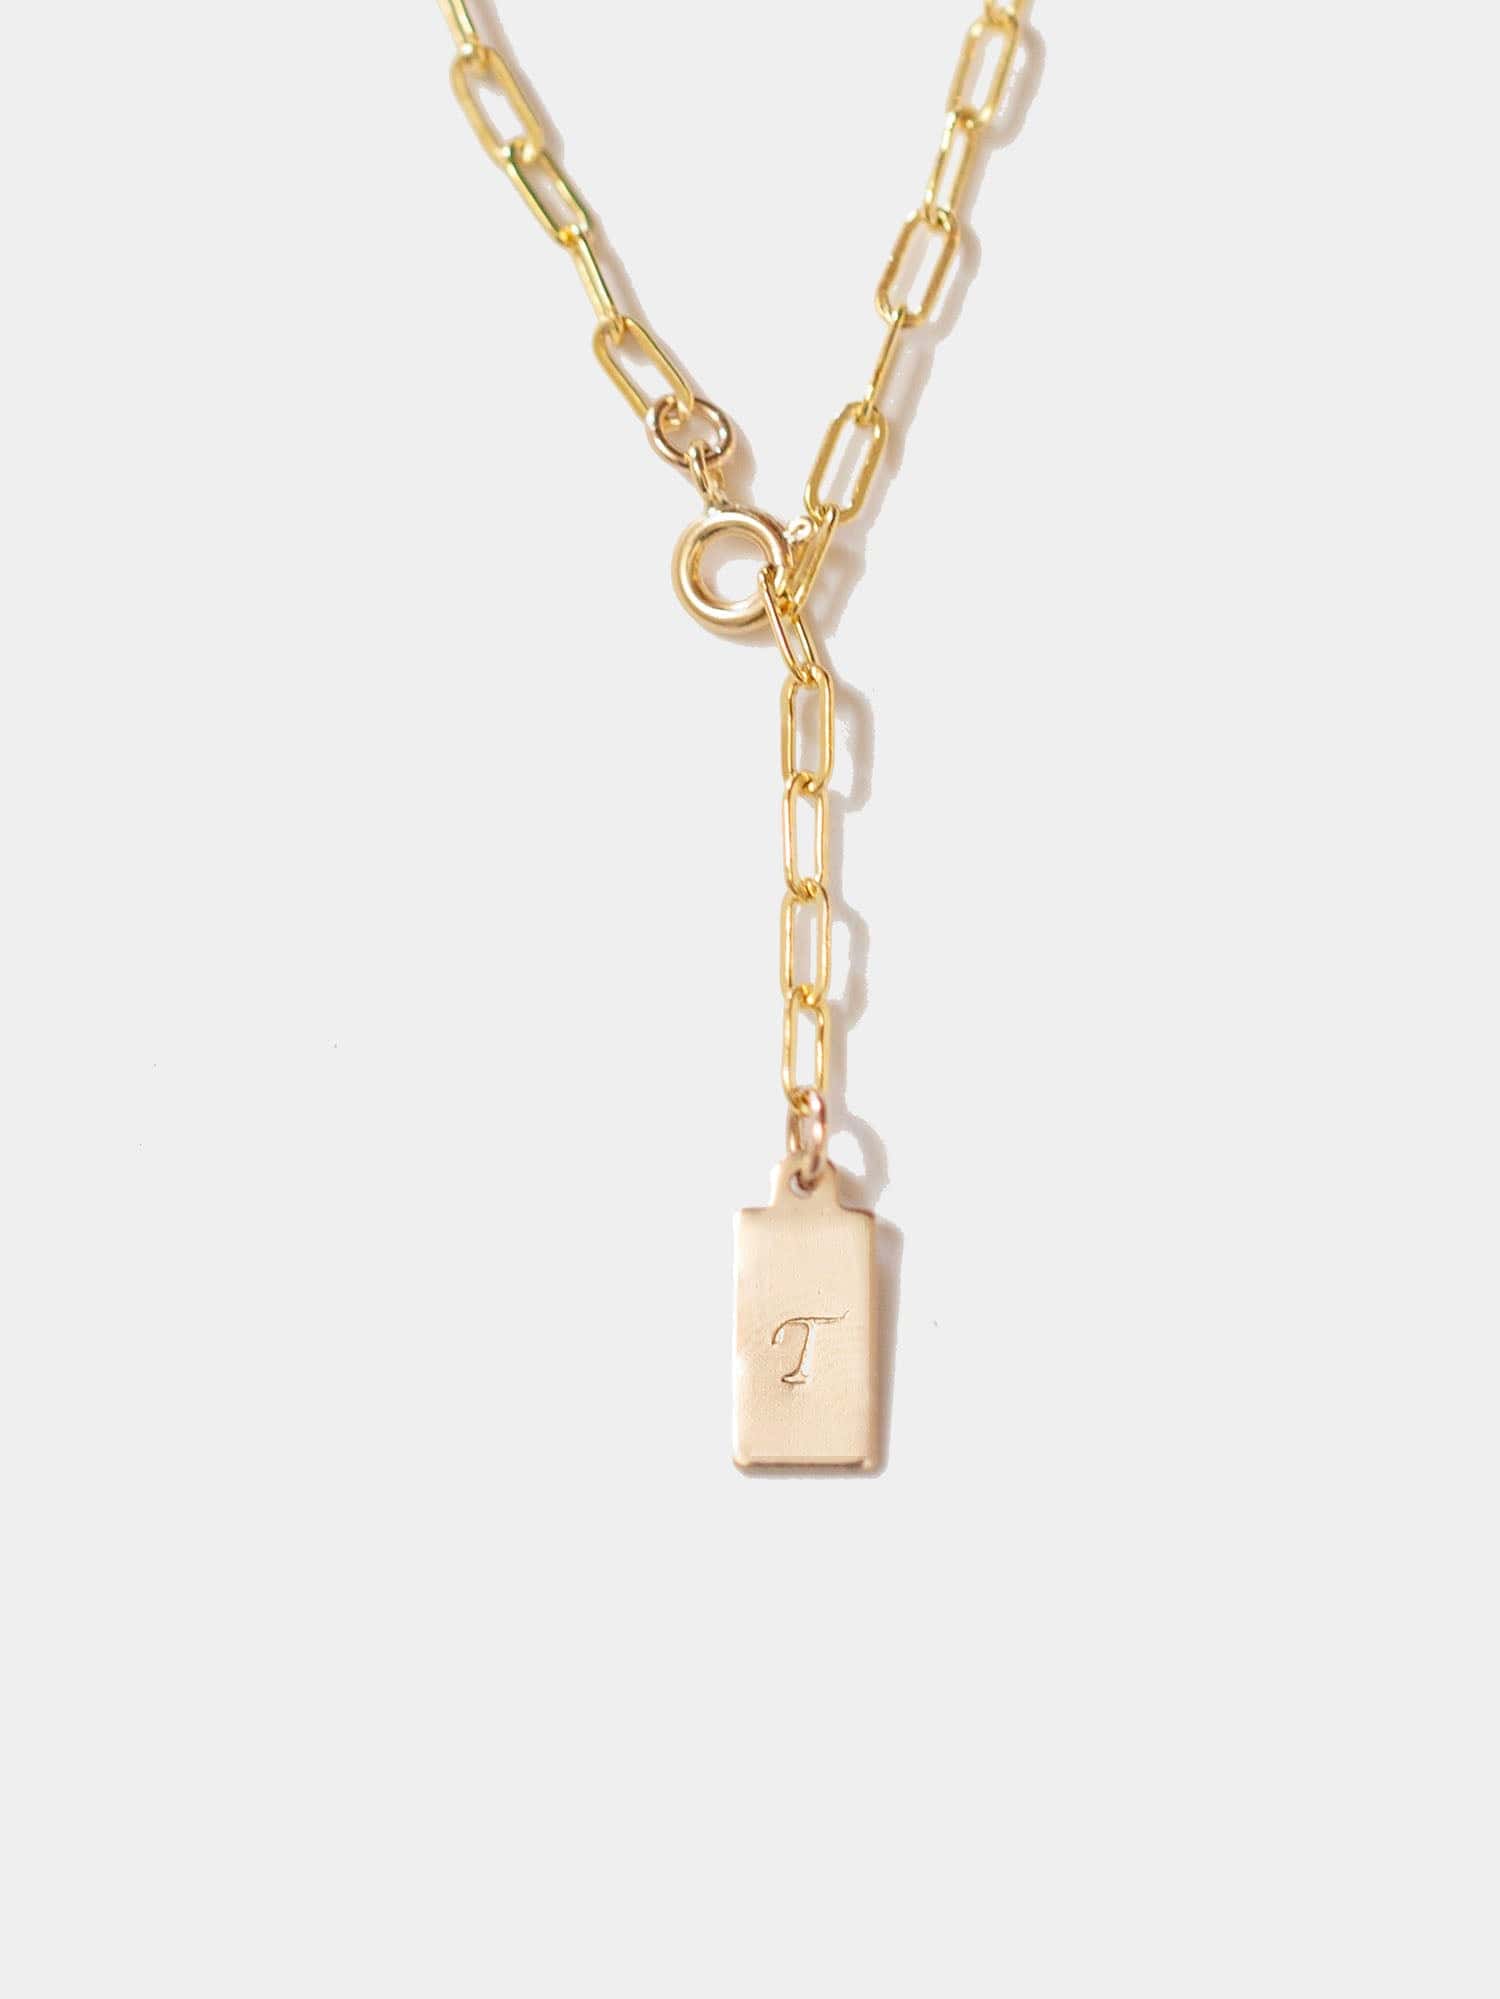 Shop OXB Necklaces Gold Filled / A Monogram Convertible Chain